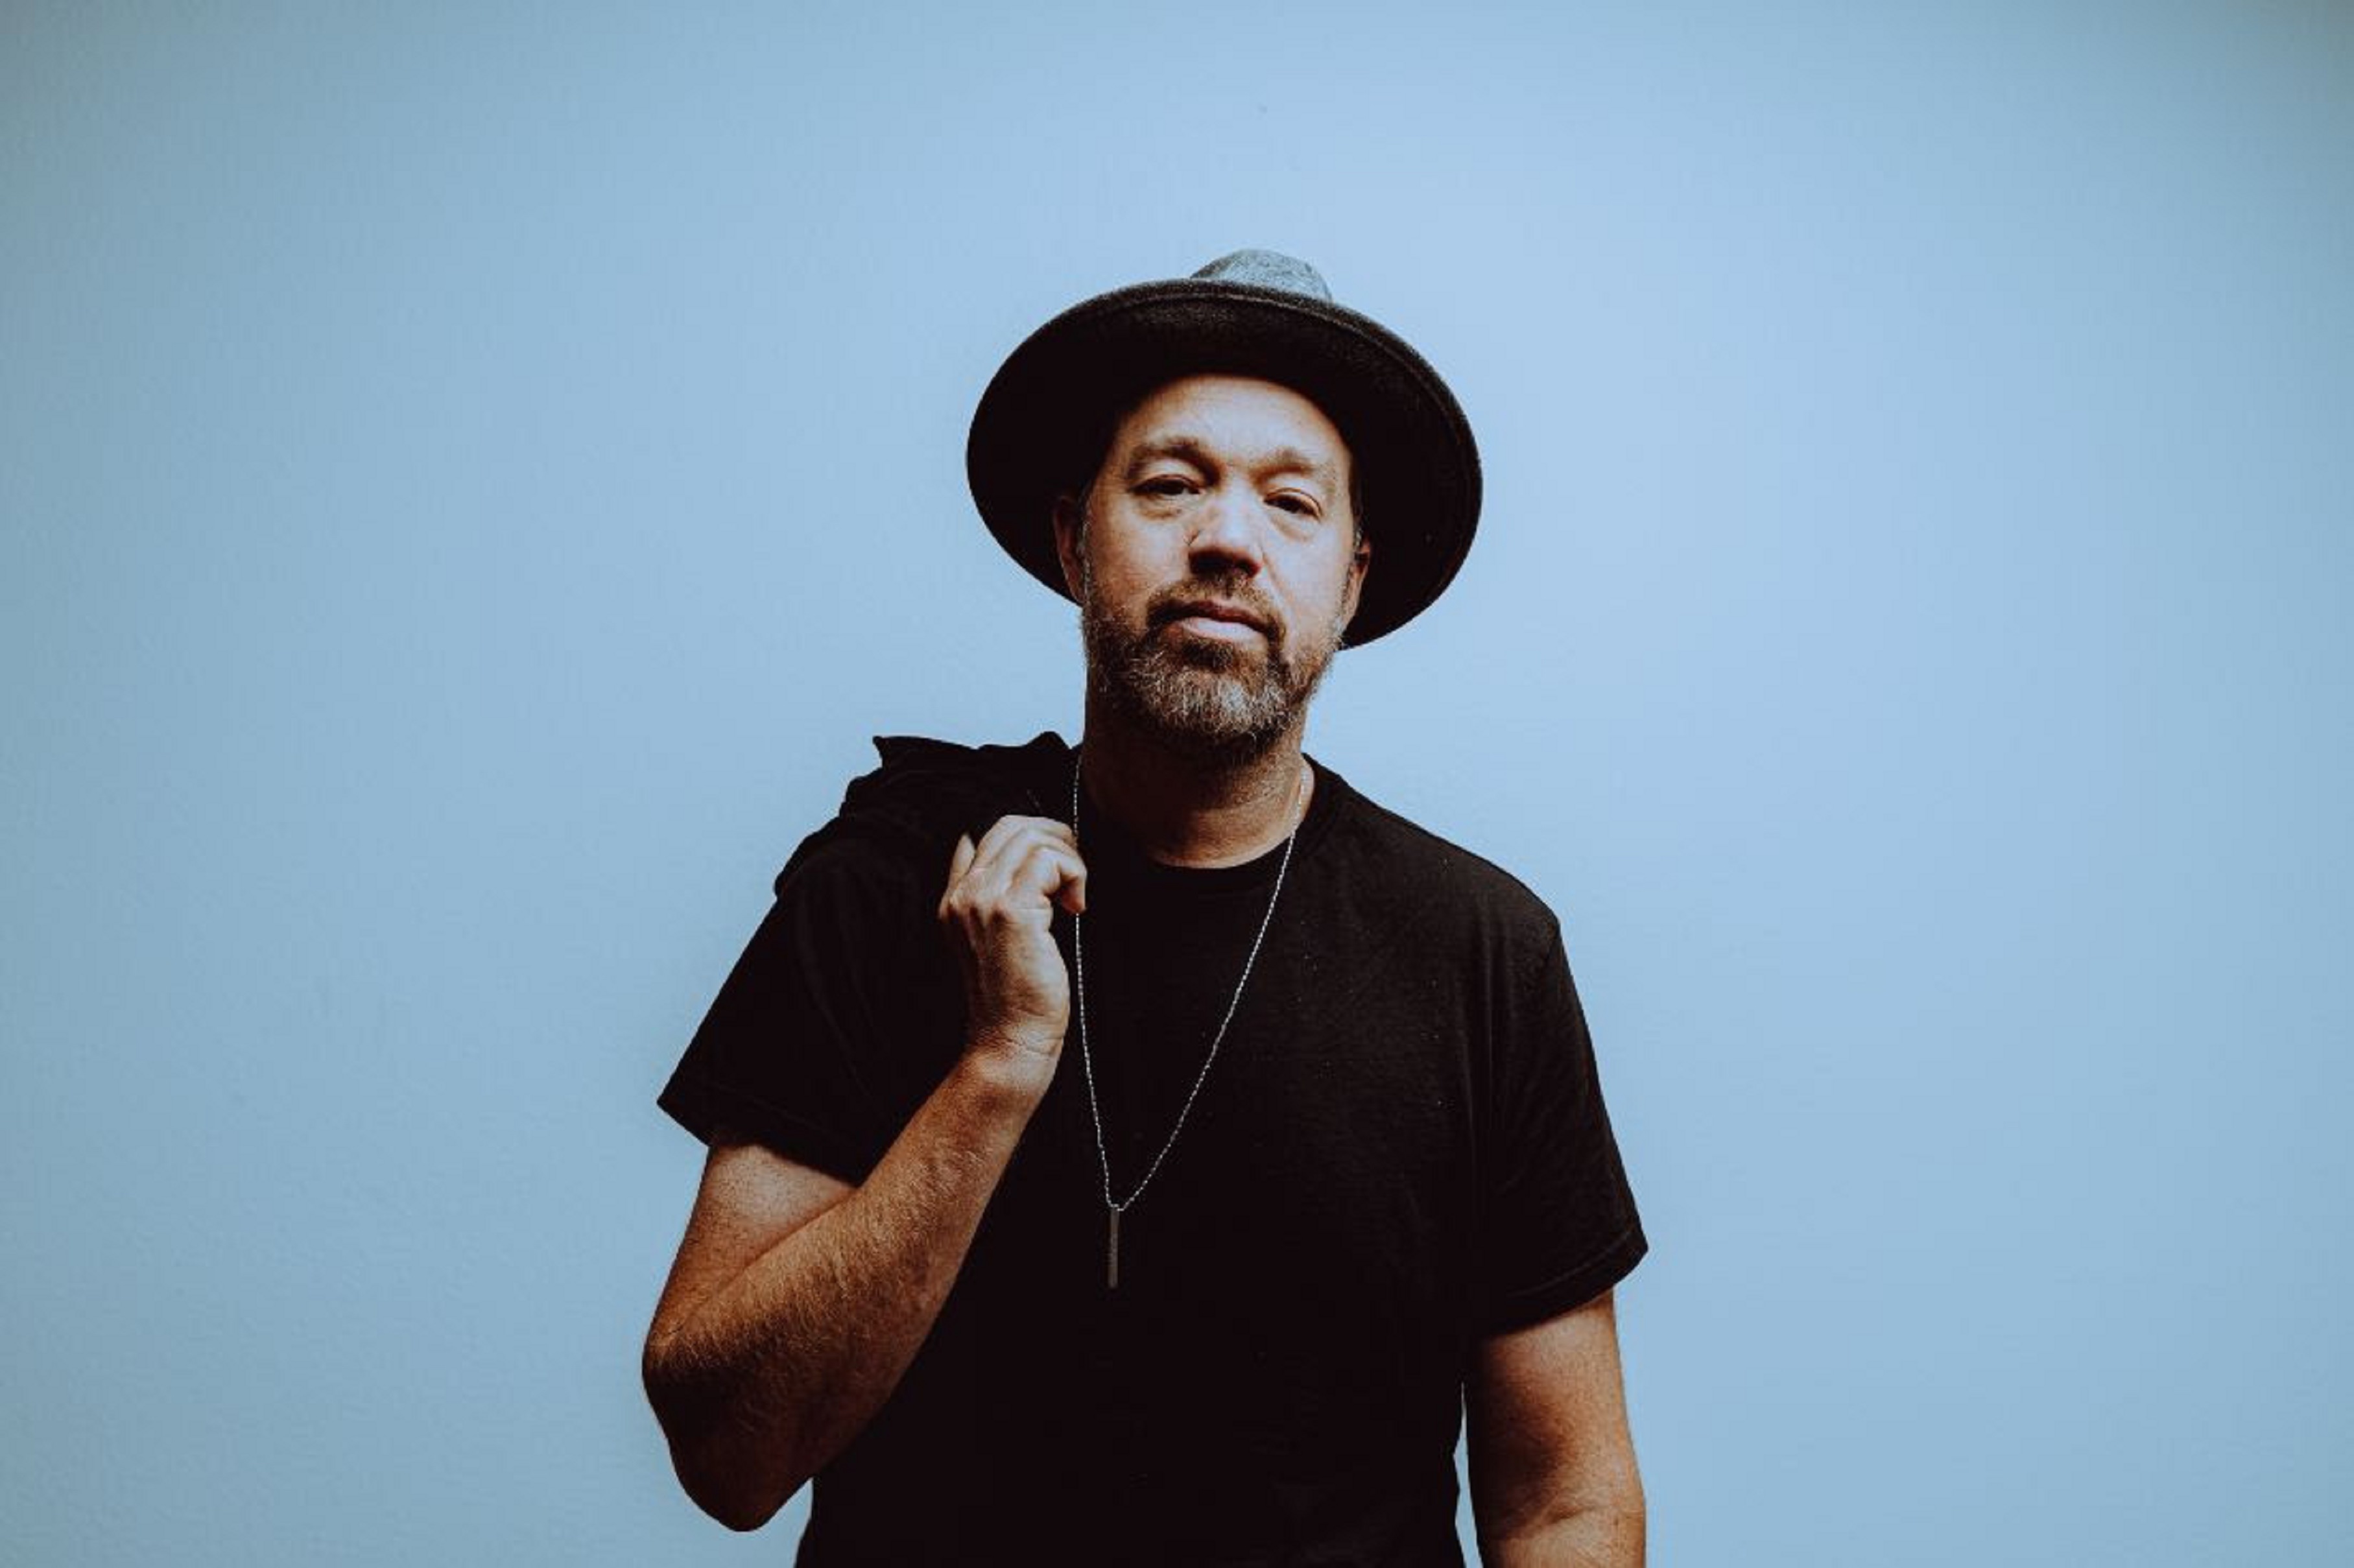 Eric Krasno Reflects On The Intimacy Of Lockdown With New Single, “Alone Together"